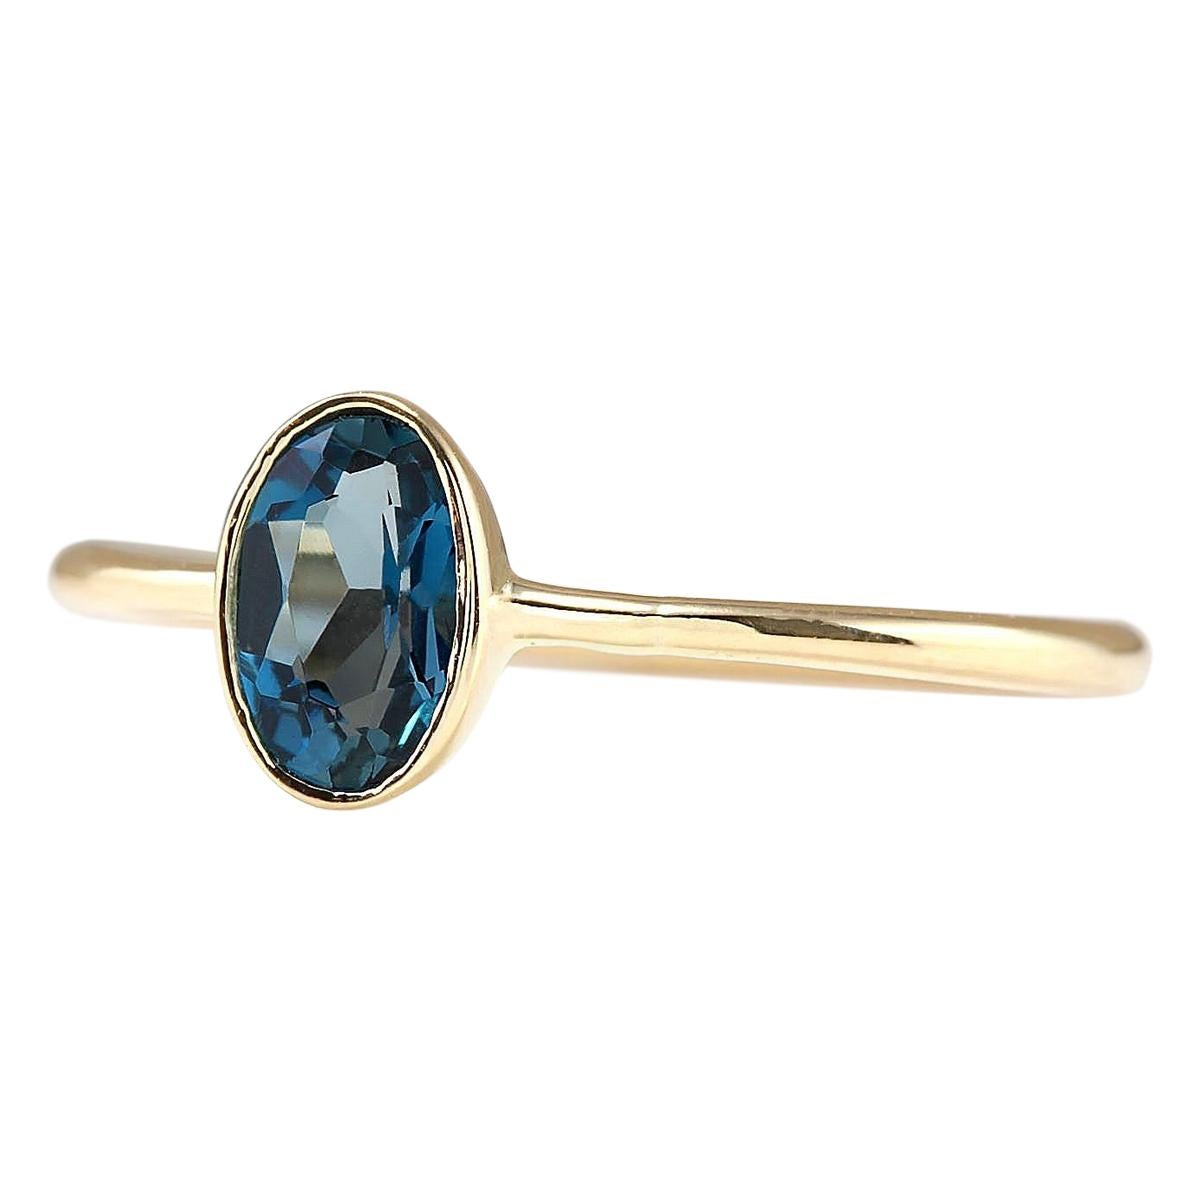 Introducing our charming 14 Karat Yellow Gold Ring adorned with a stunning 0.60 Carat Natural Topaz gemstone. Stamped for authenticity, this ring weighs a mere 1.2 grams, ensuring comfort and wearability. The Topaz gemstone, weighing 0.60 carats and